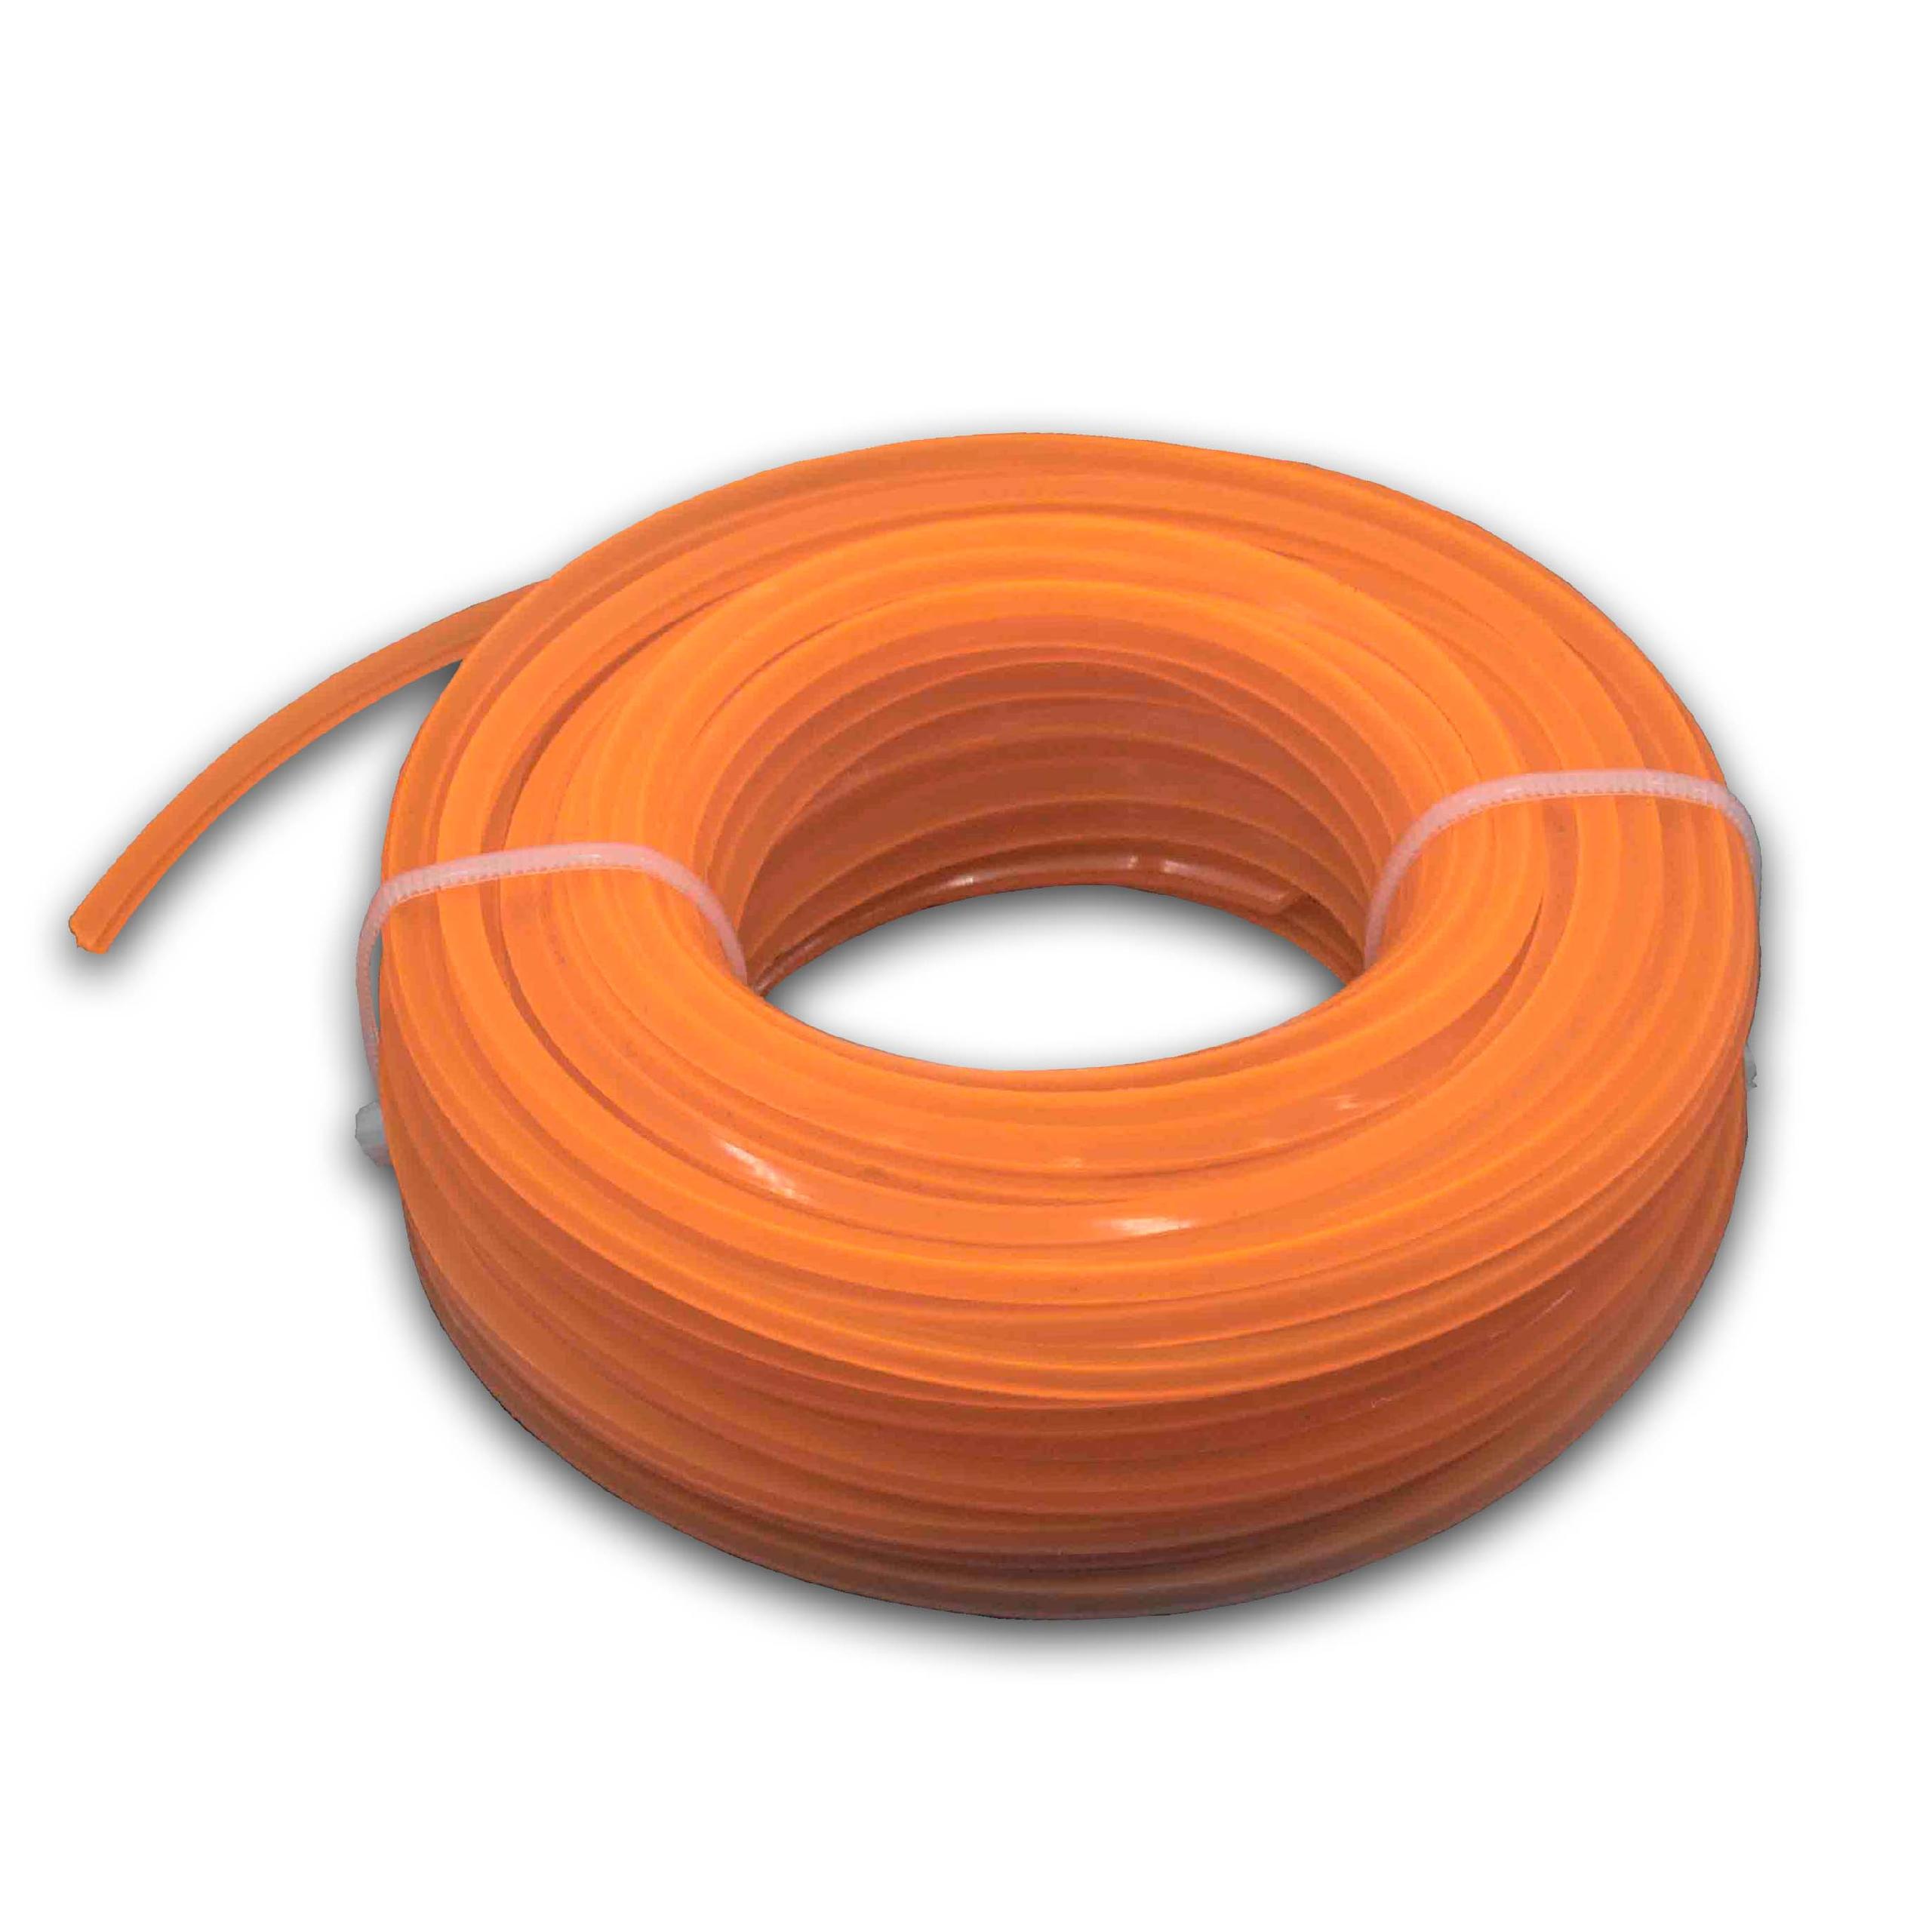 Line suitable for Bosch Makita Lawn Mower, Grass Trimmer - Trimmer Line Orange, 2.4 mm x 15 m, Square